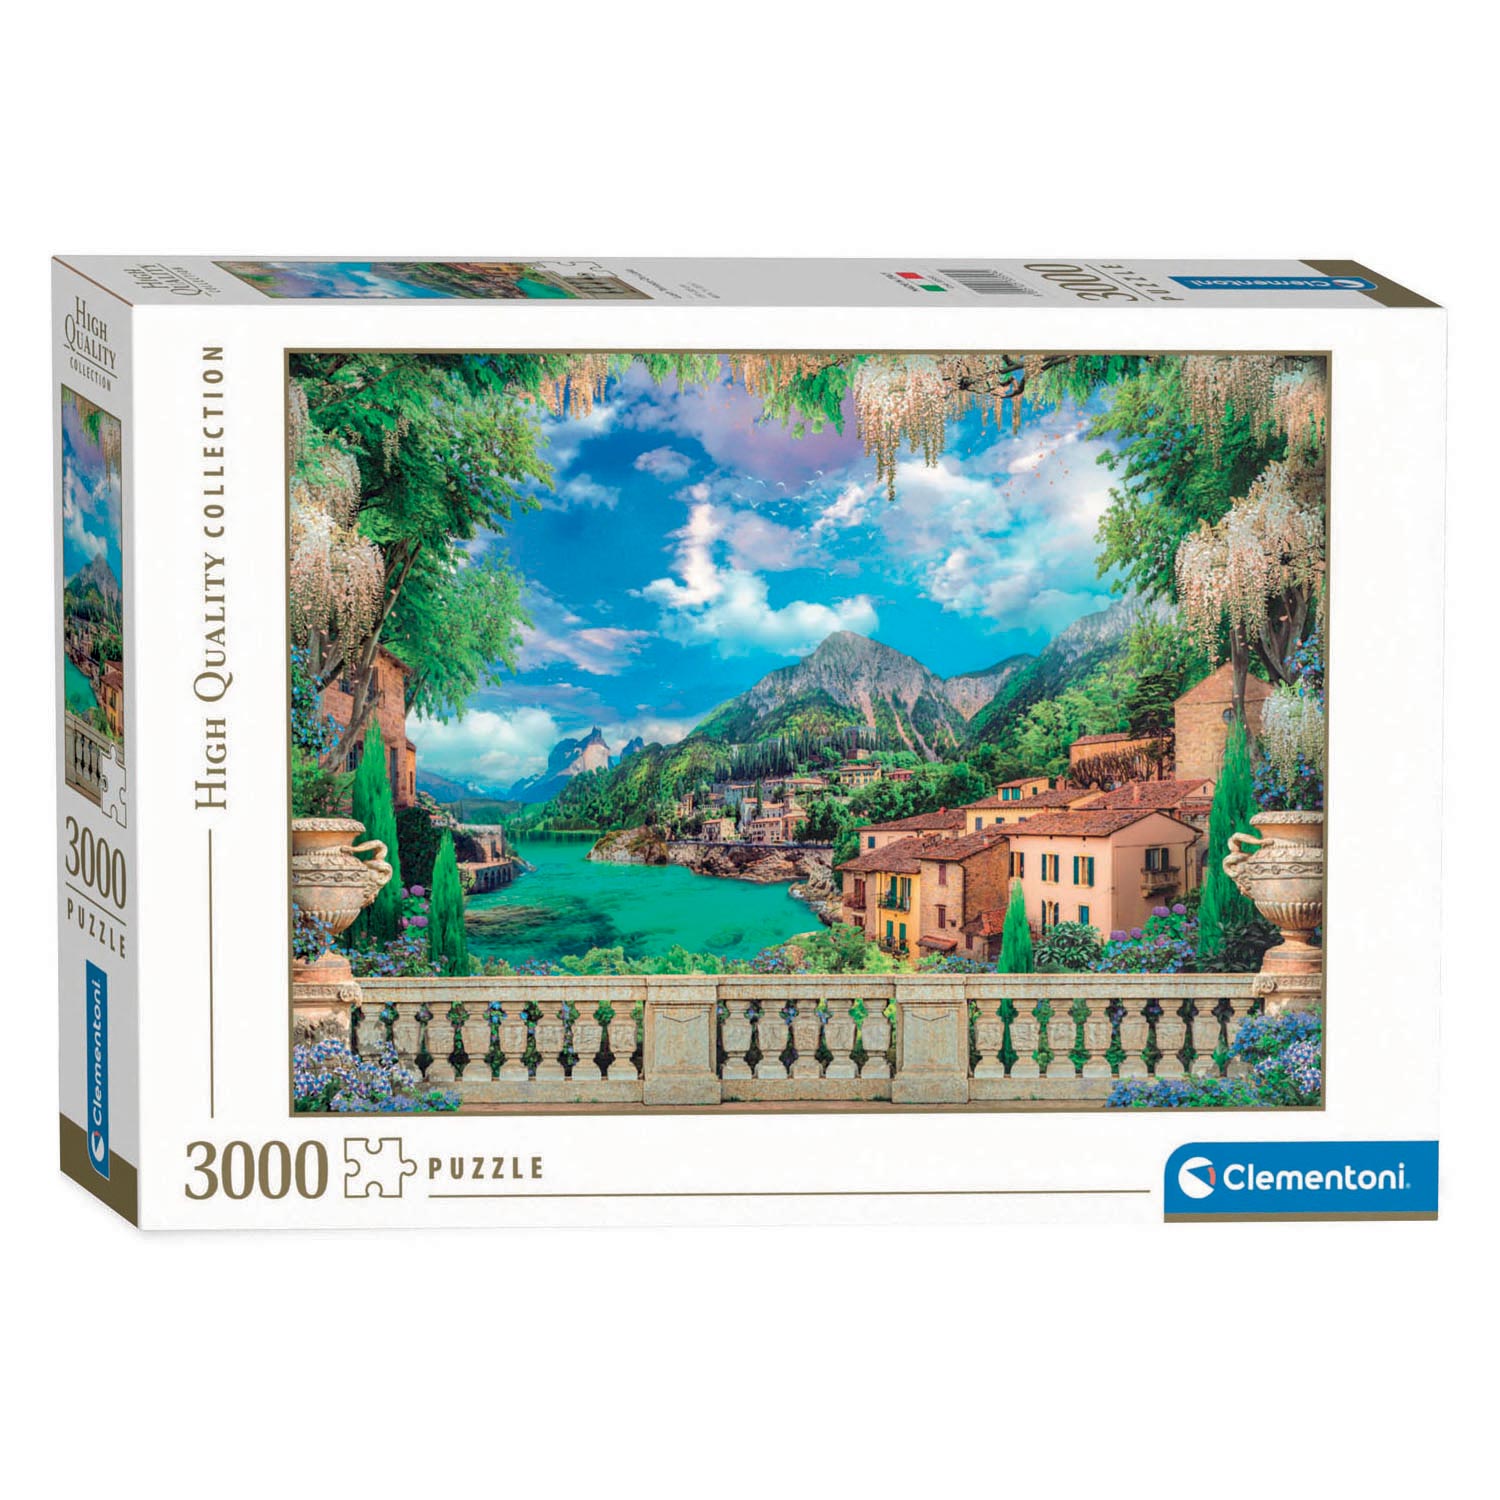 Clementoni Puzzle Terrasse am See, 3000 Teile.